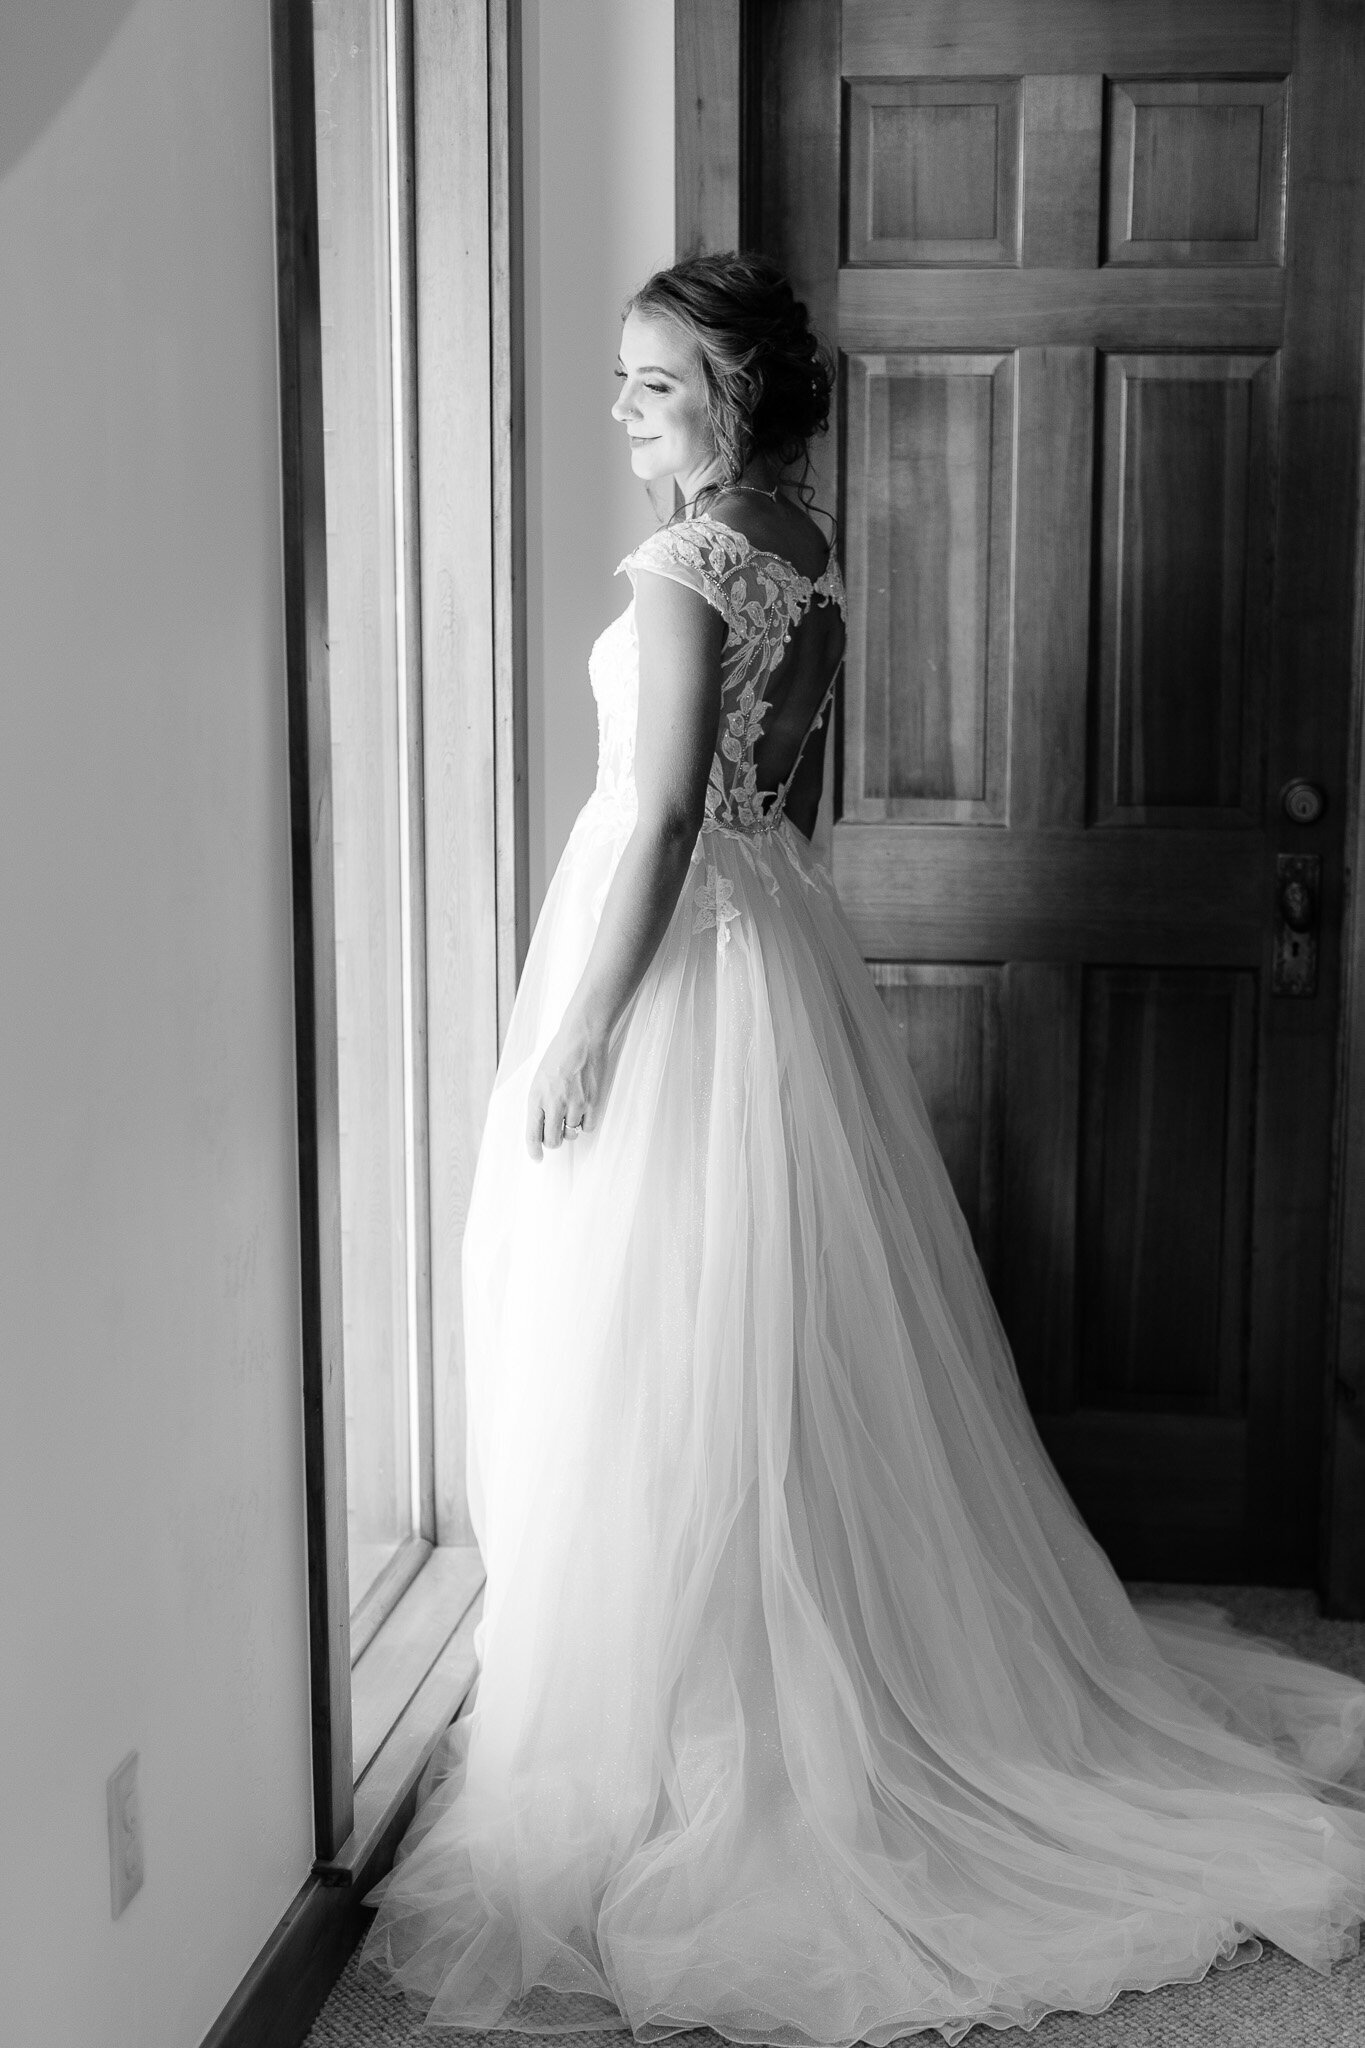 Black and white image of bride looking out window